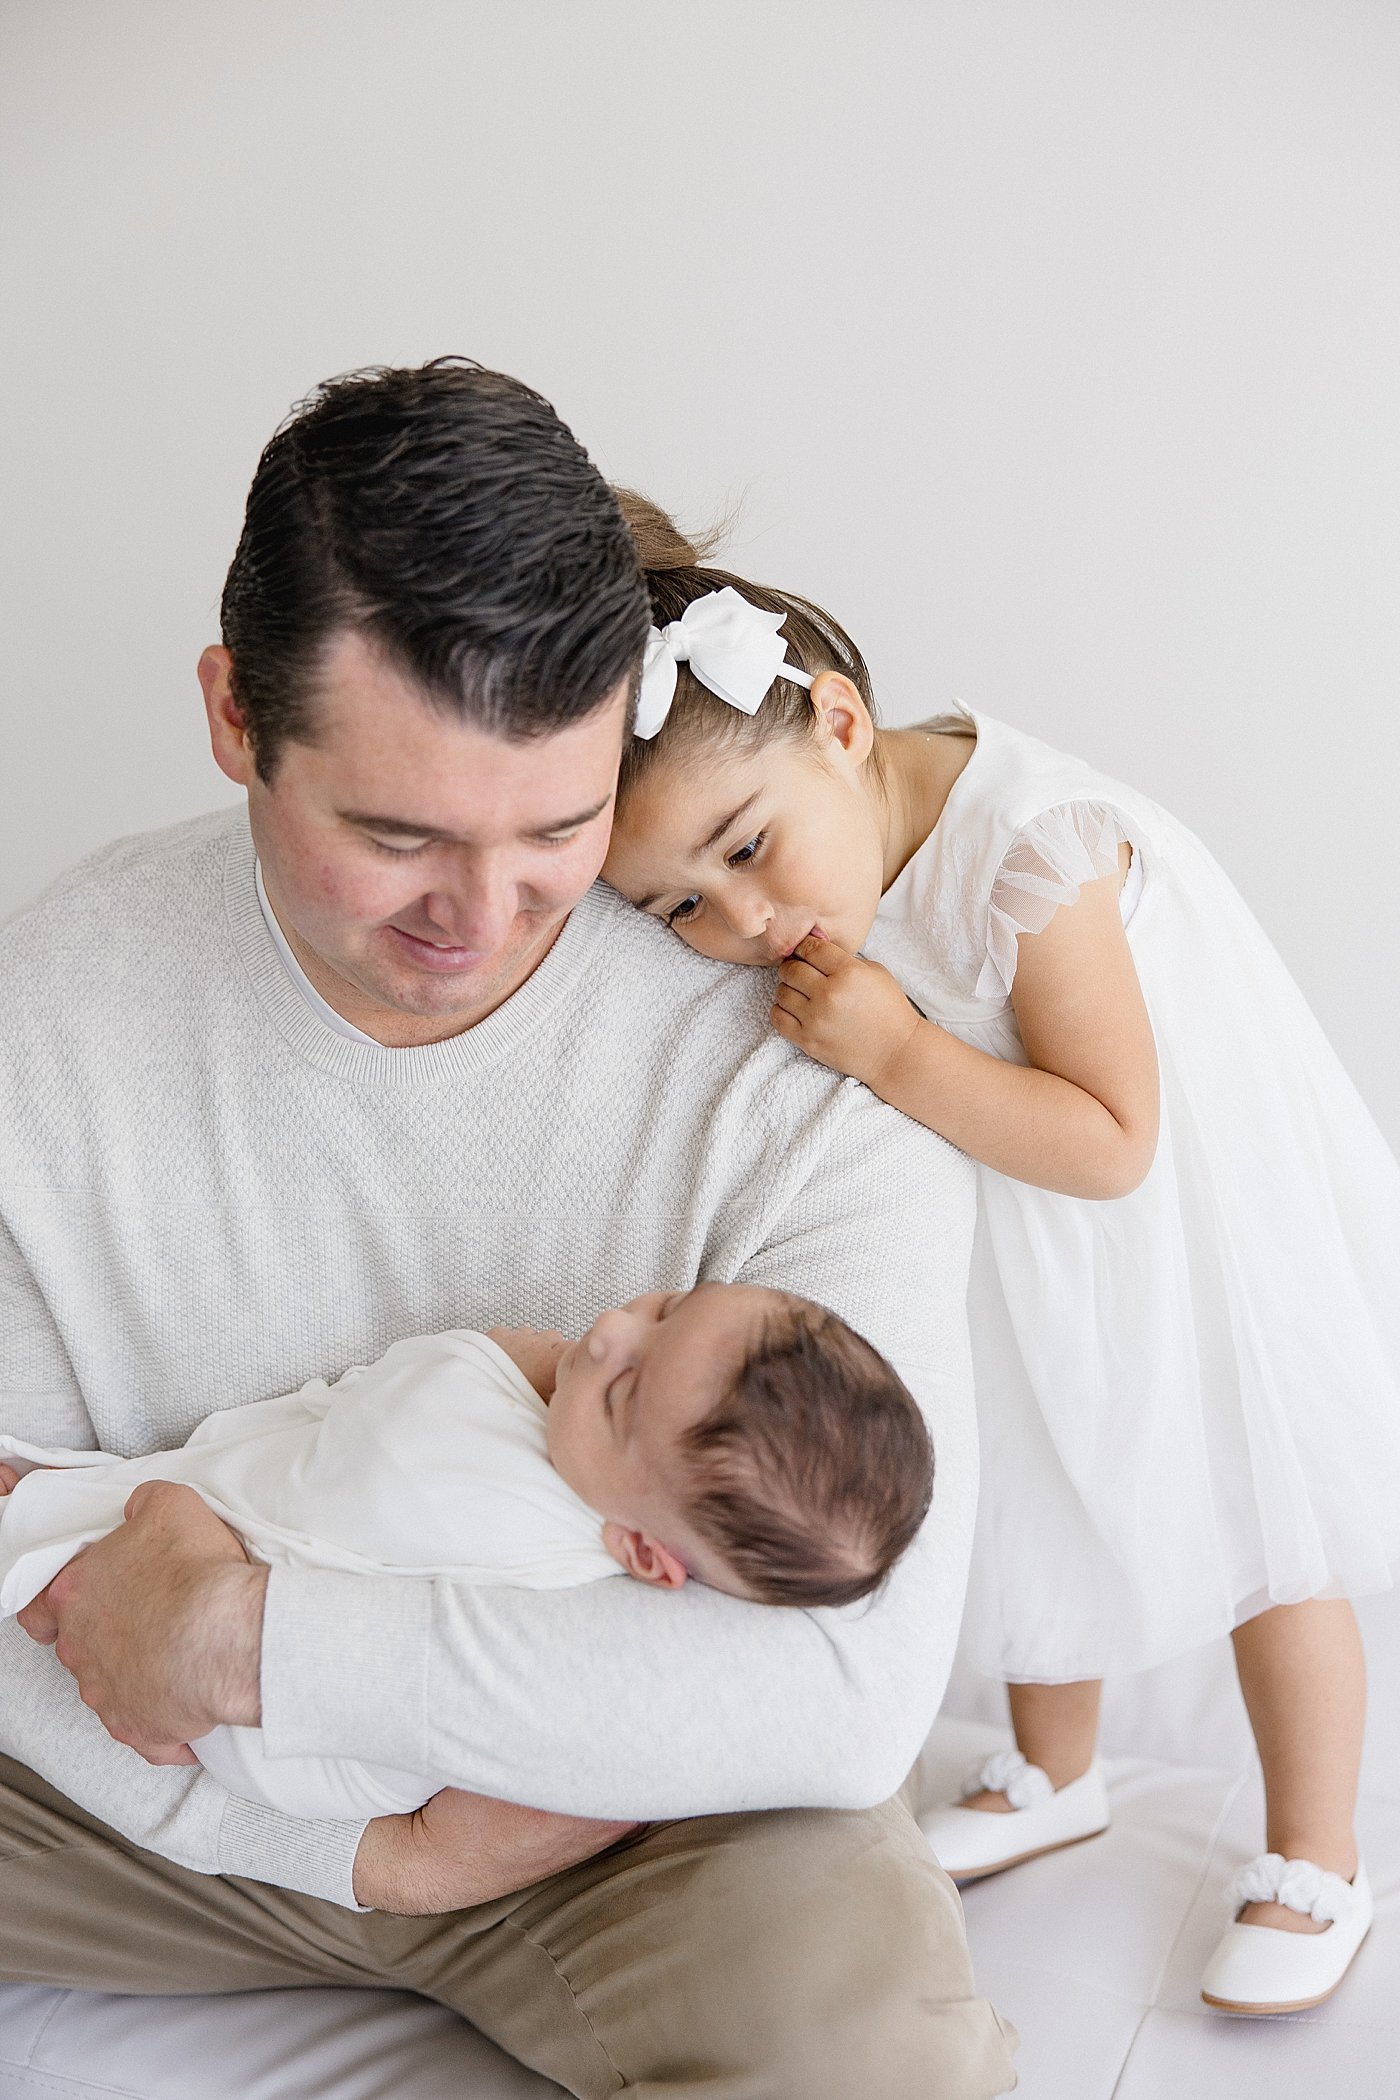 Dad With Baby Boy and Sister In Studio | Ambre Williams Photography